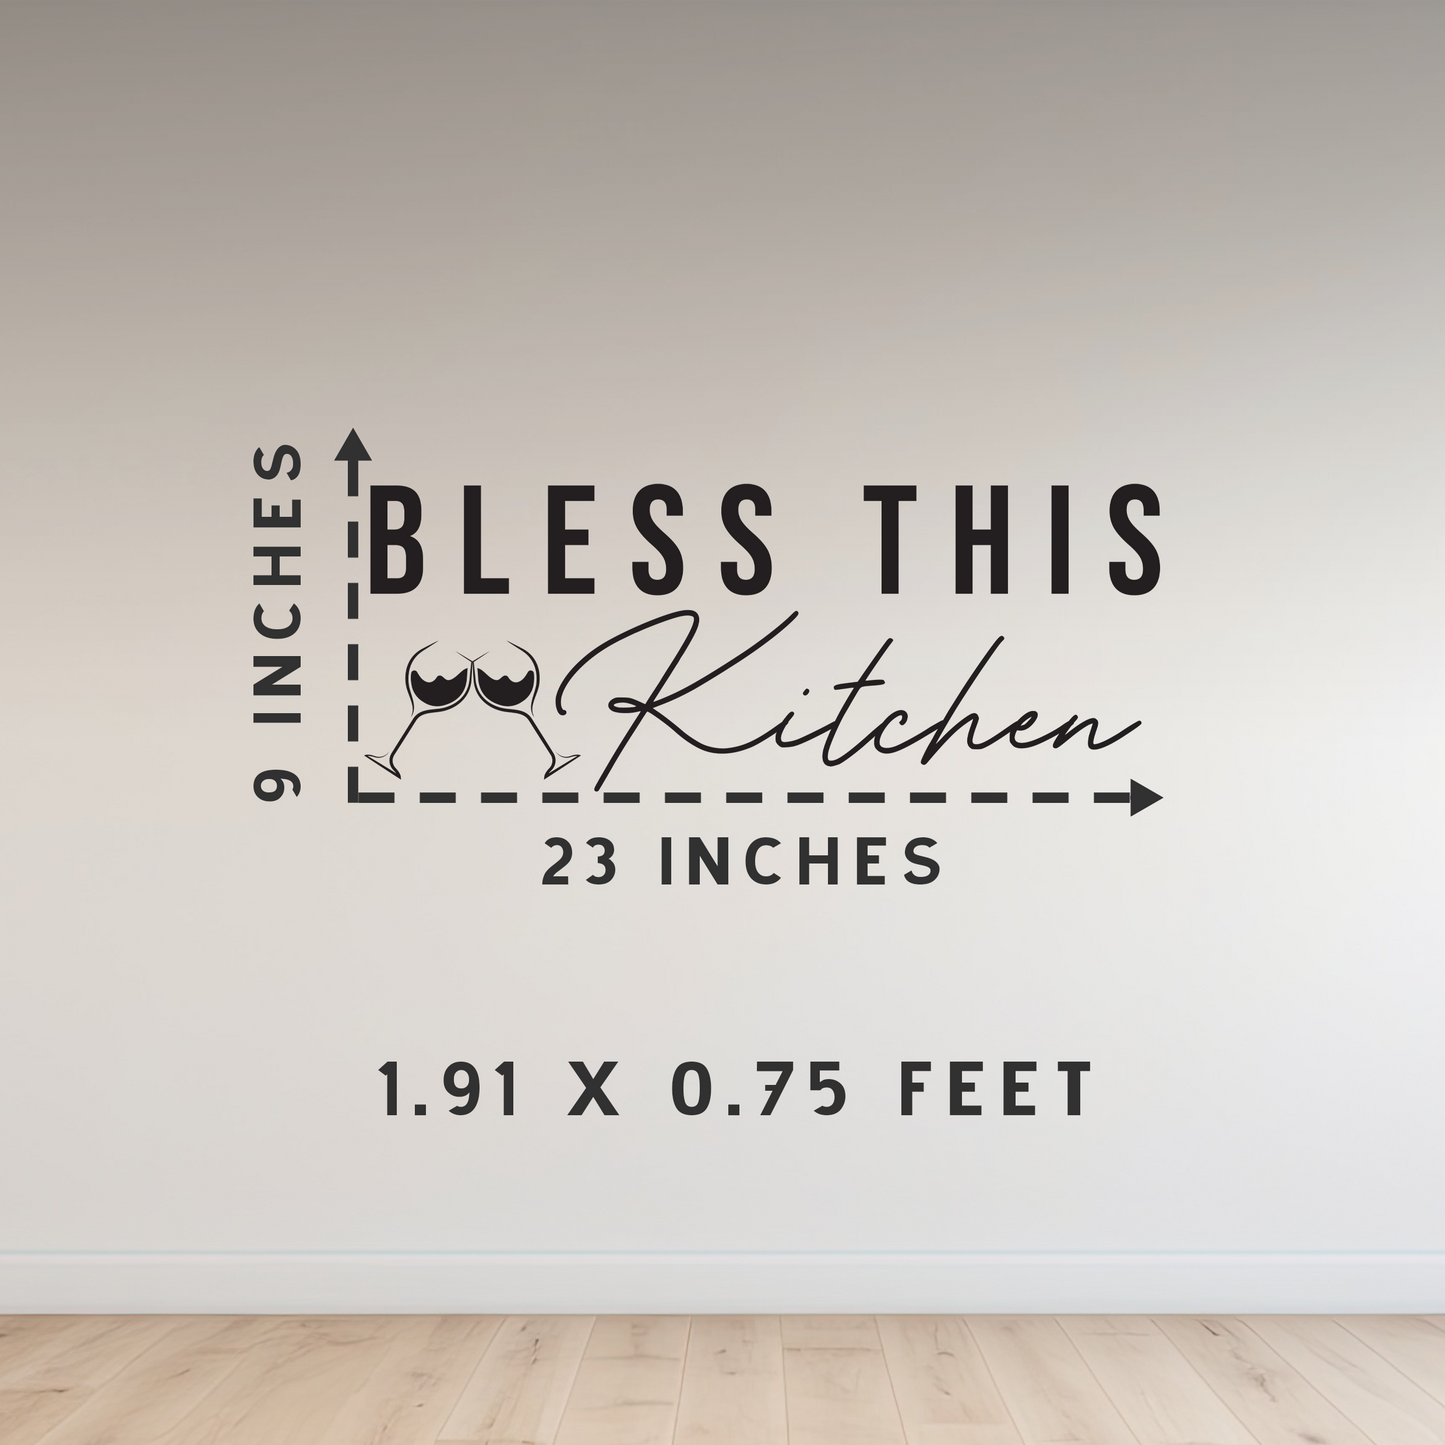 Bless This Kitchen Wall Sticker Decal